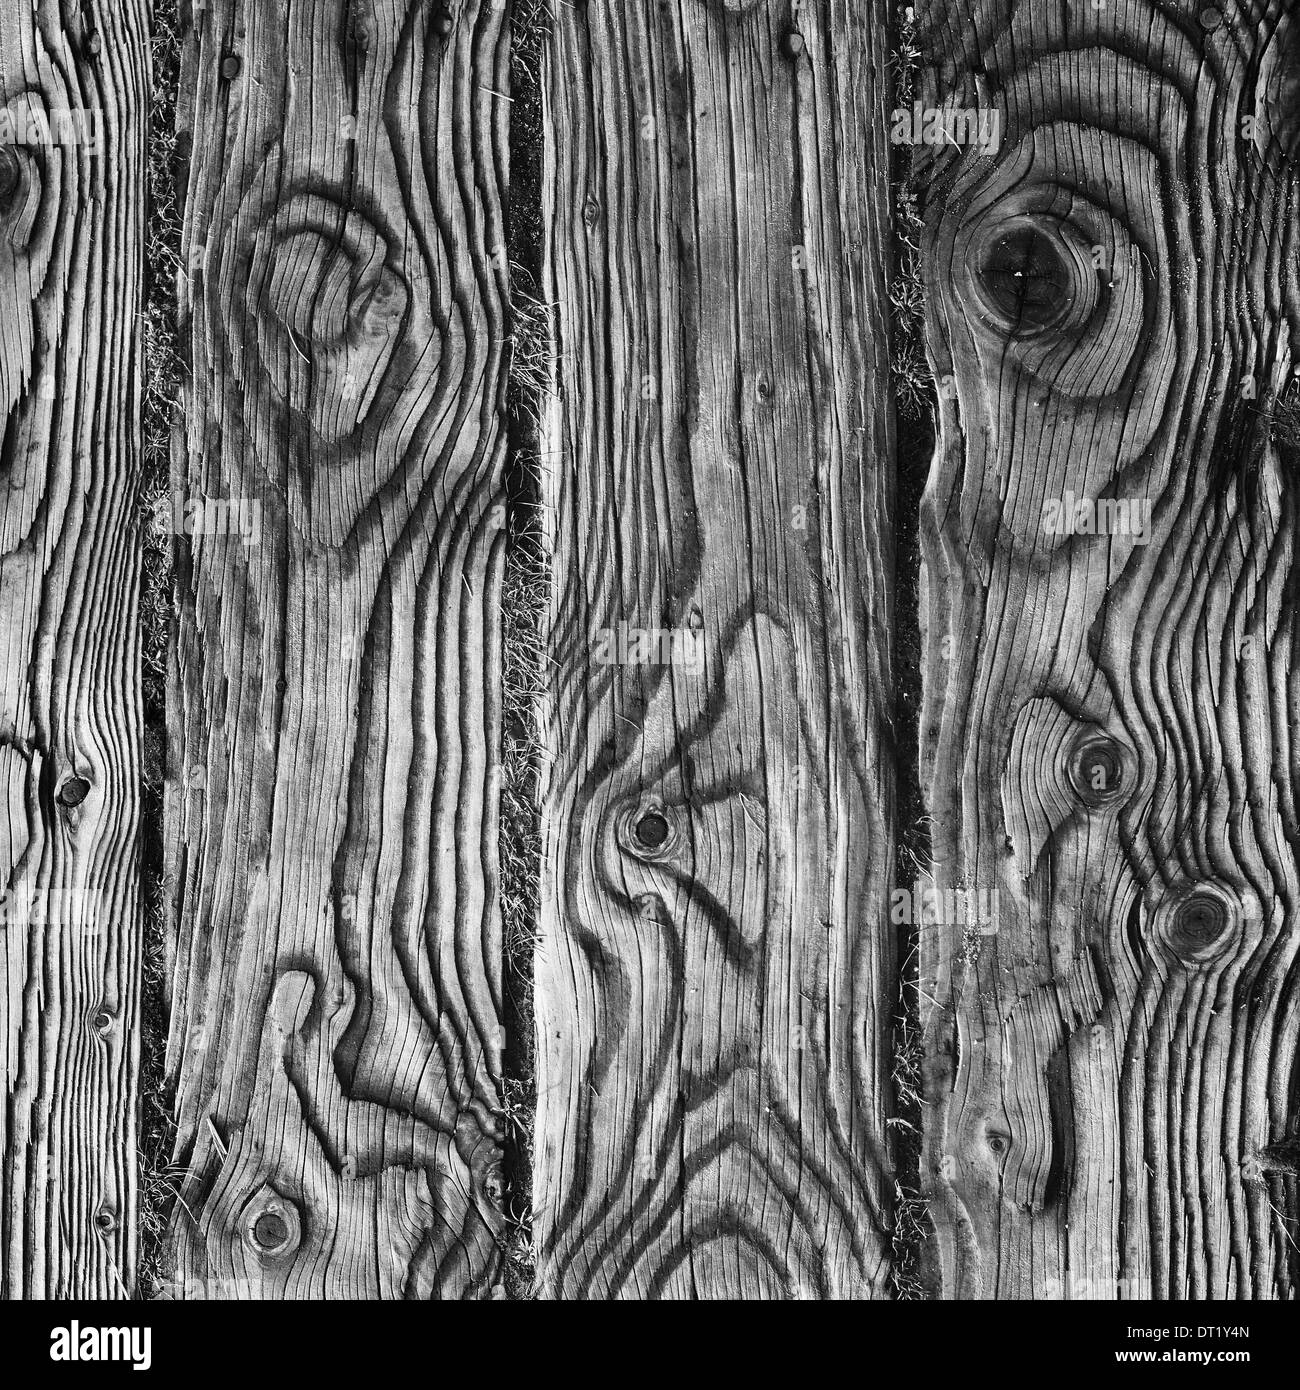 The pattern of grain in the wooden planks of a board walk. Stock Photo